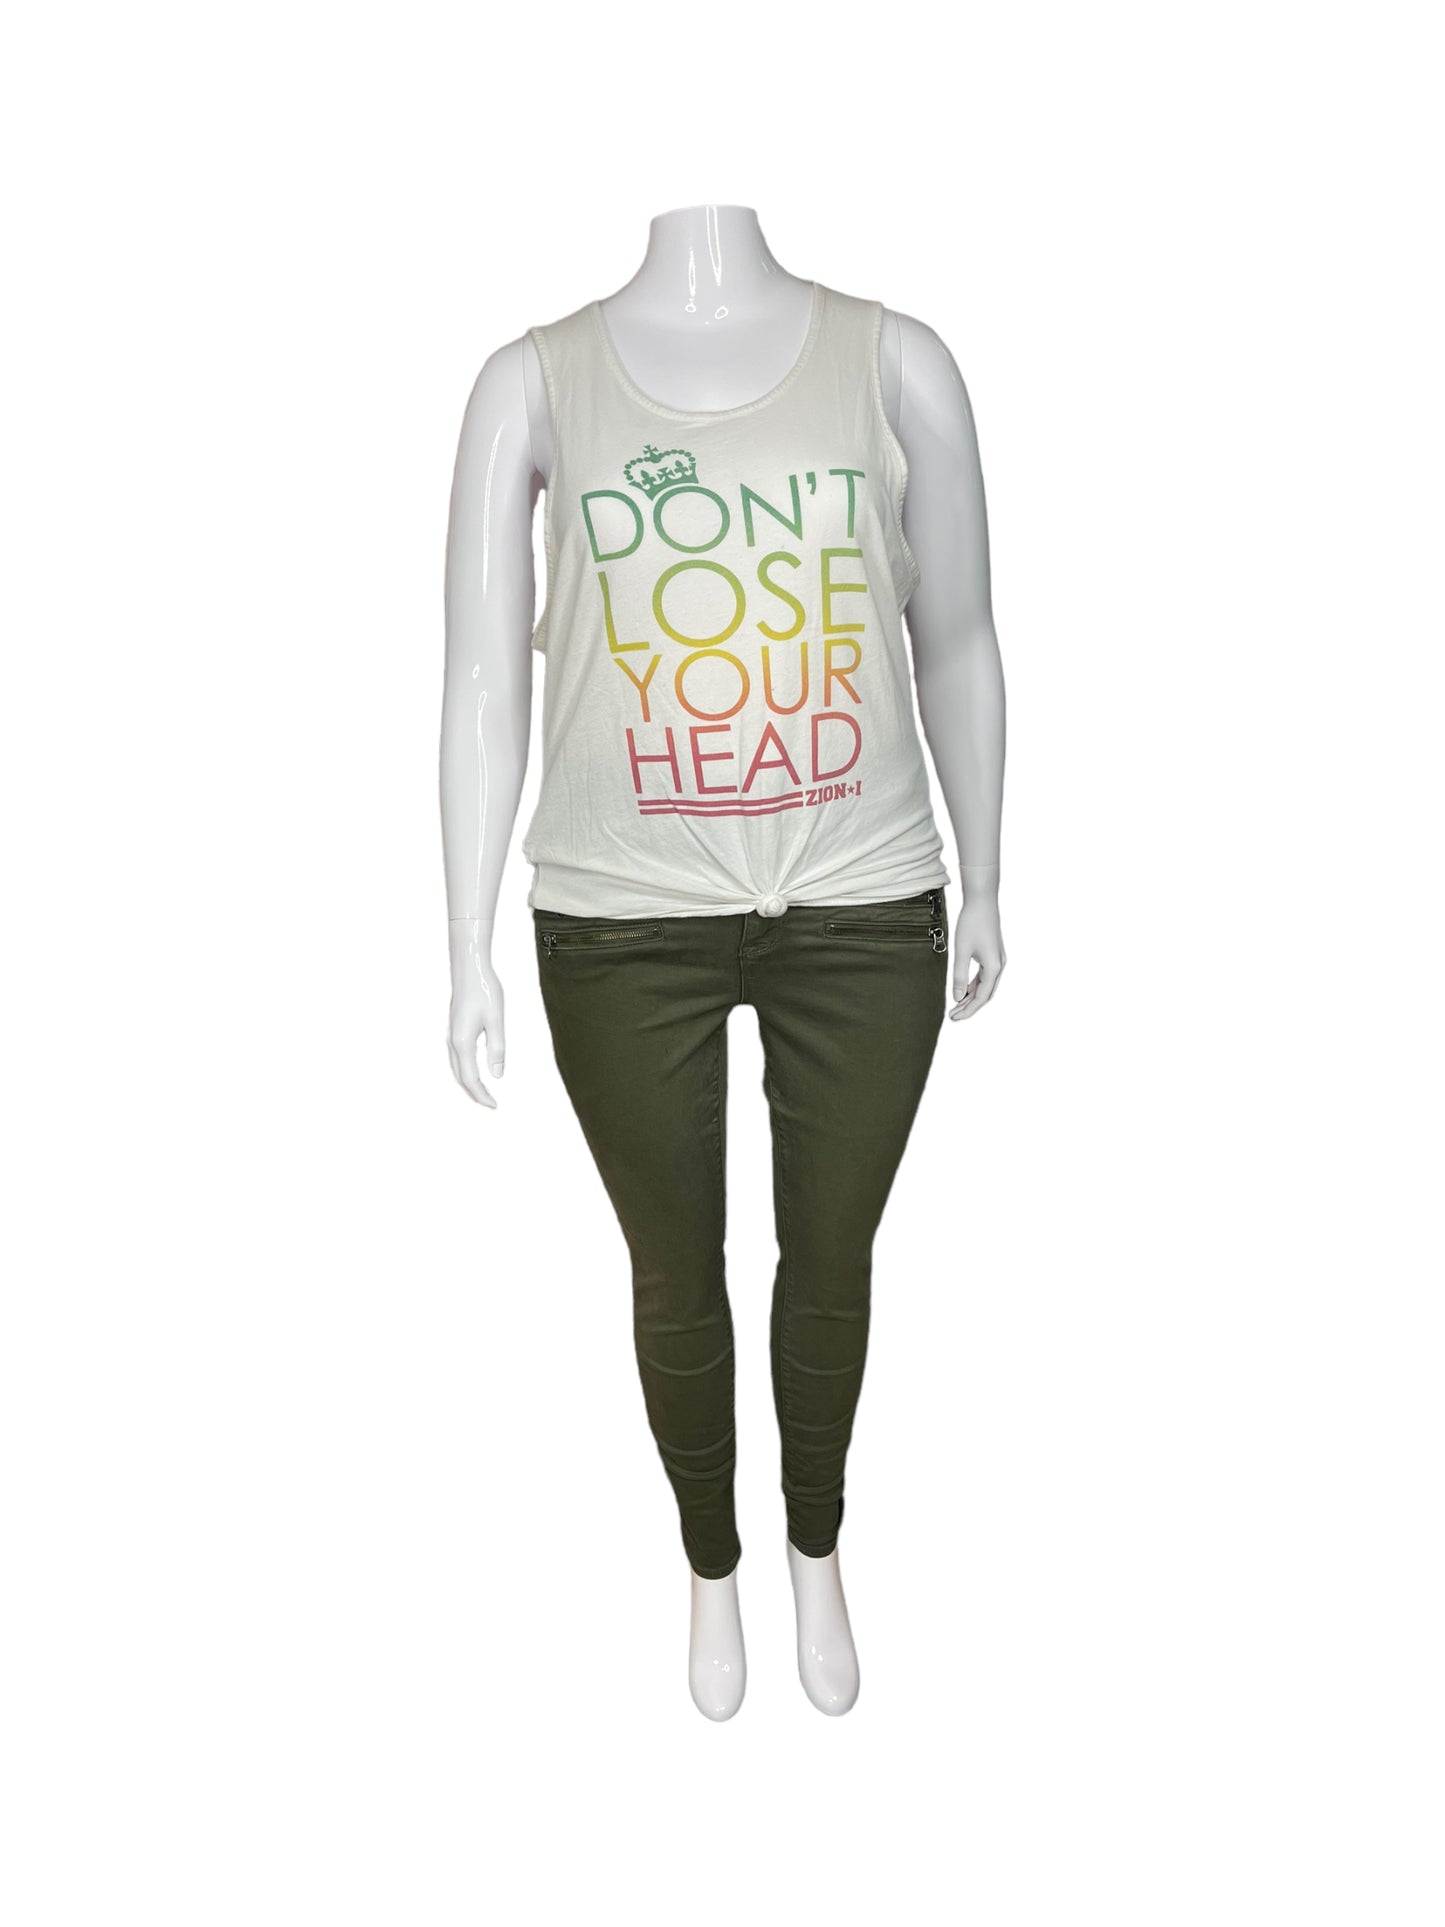 “Zion I” White Tank Top w/ ‘DON’T LOSE YOUR HEAD” in Rainbow Ombré (L)